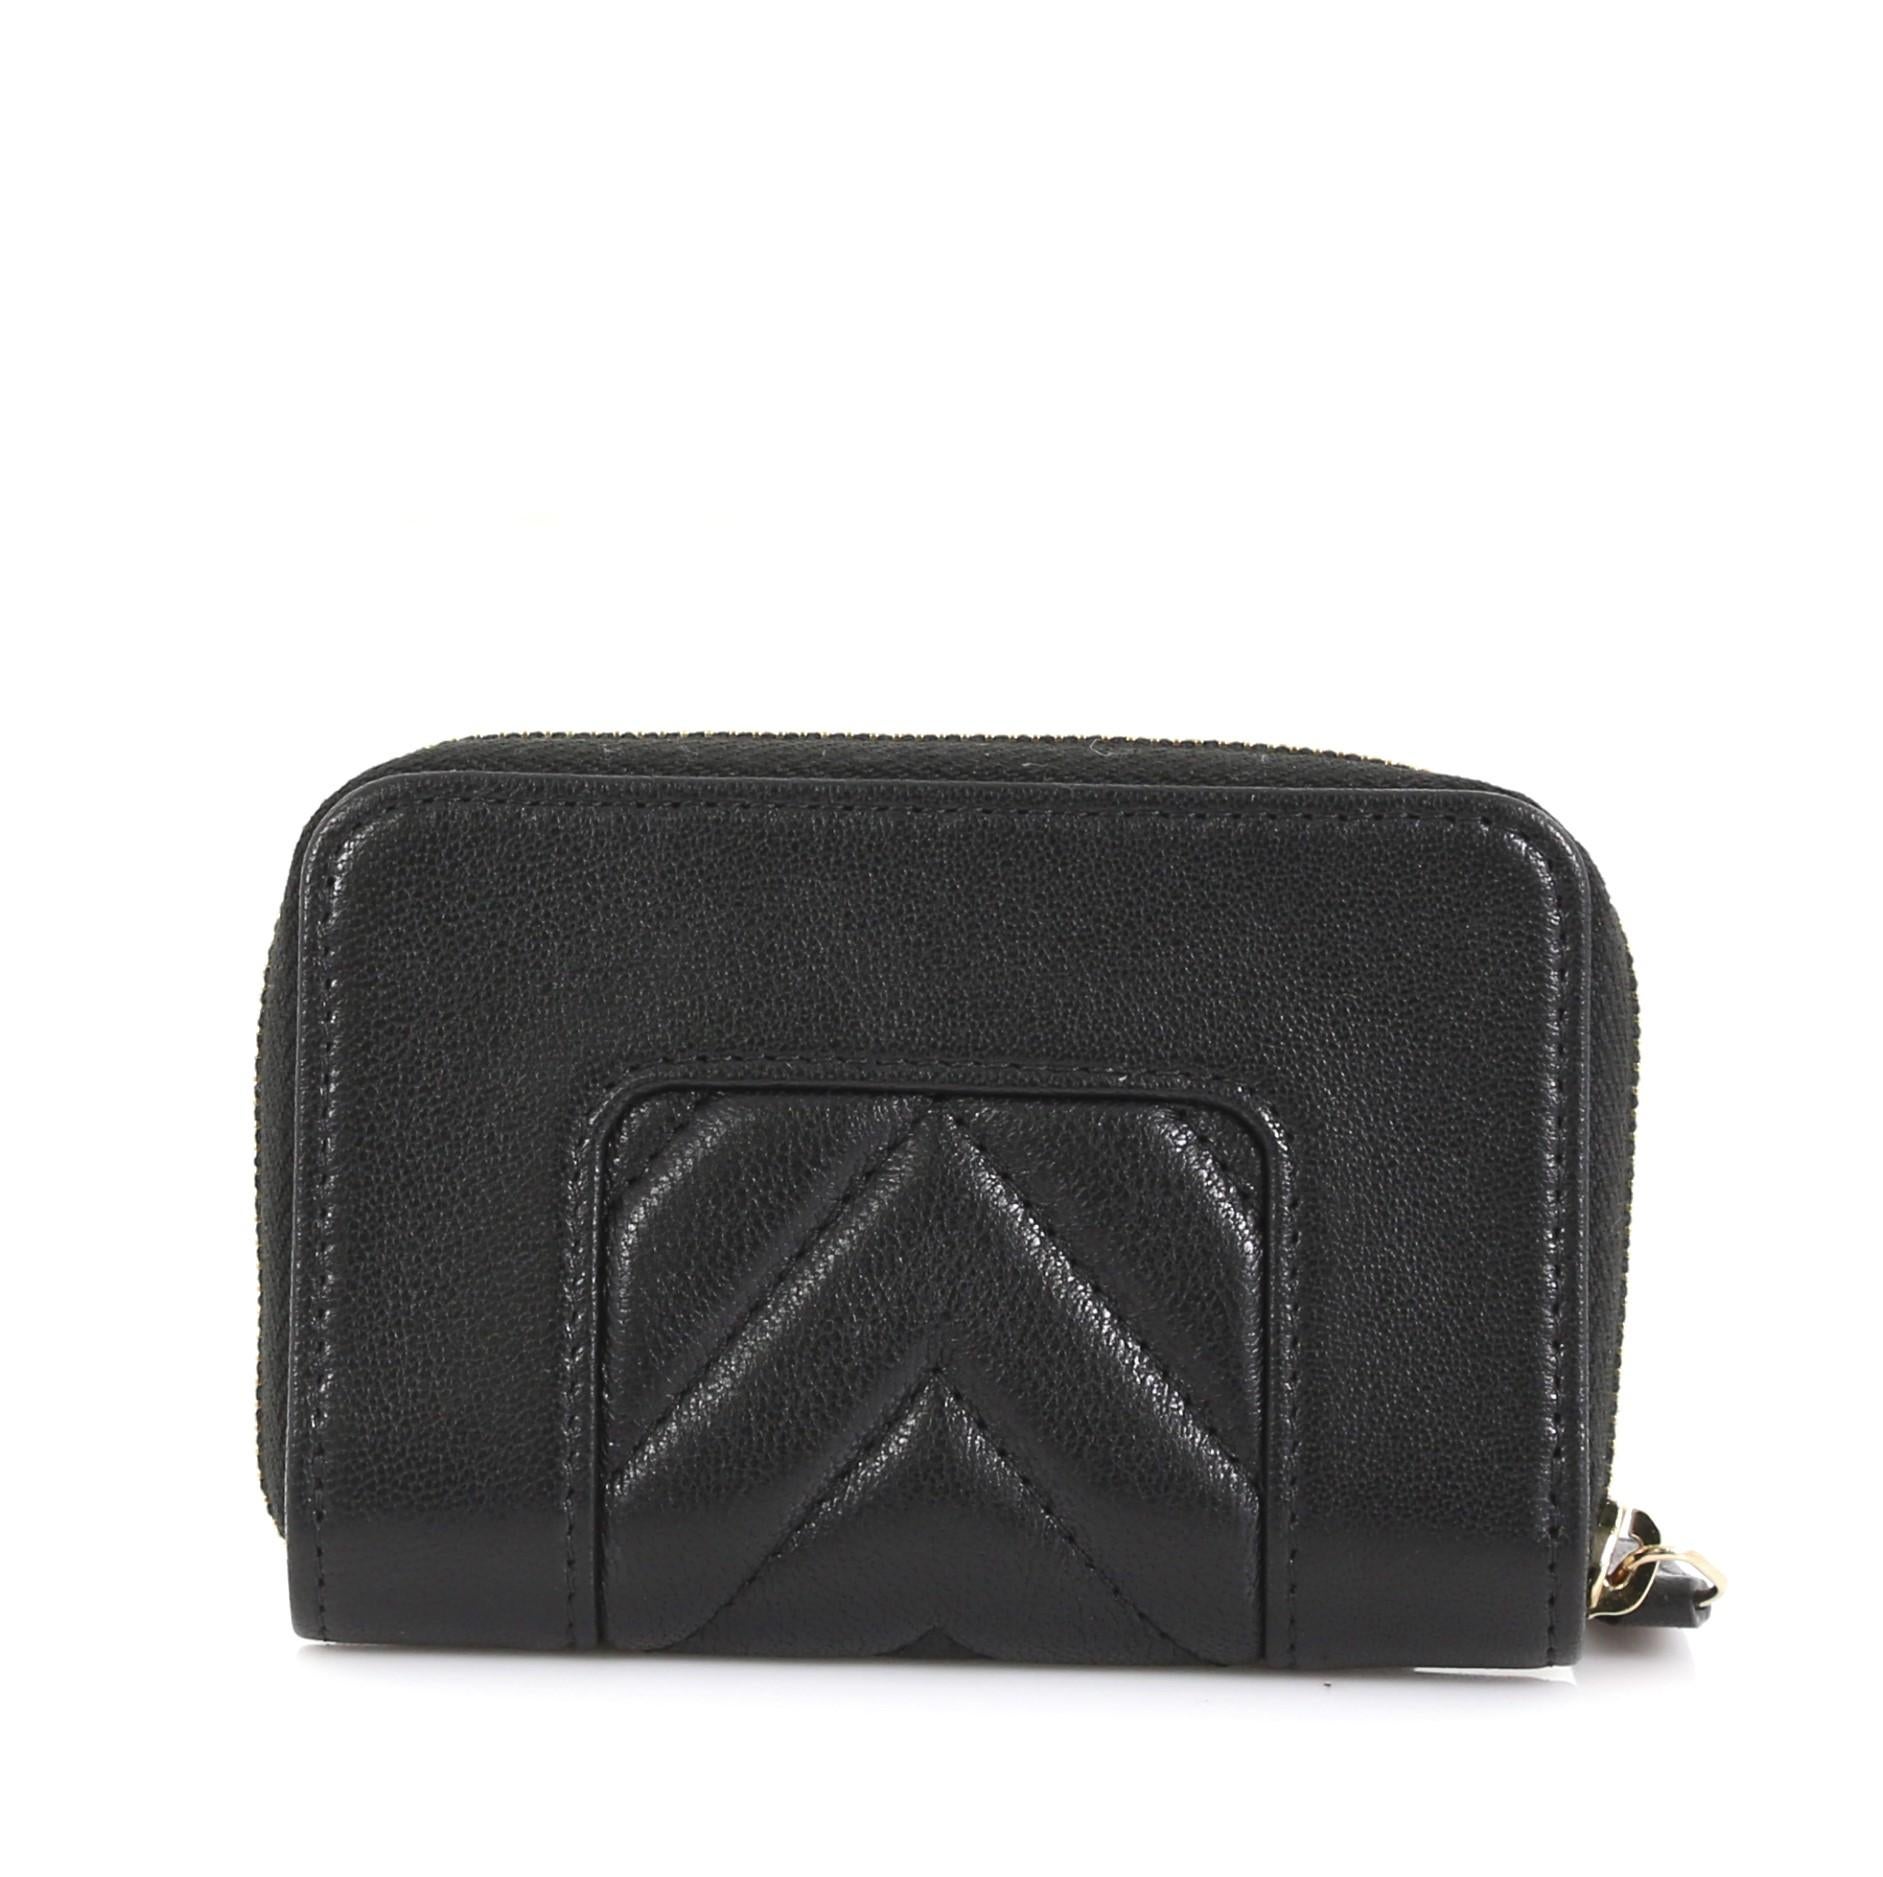 classic zipped coin purse chanel